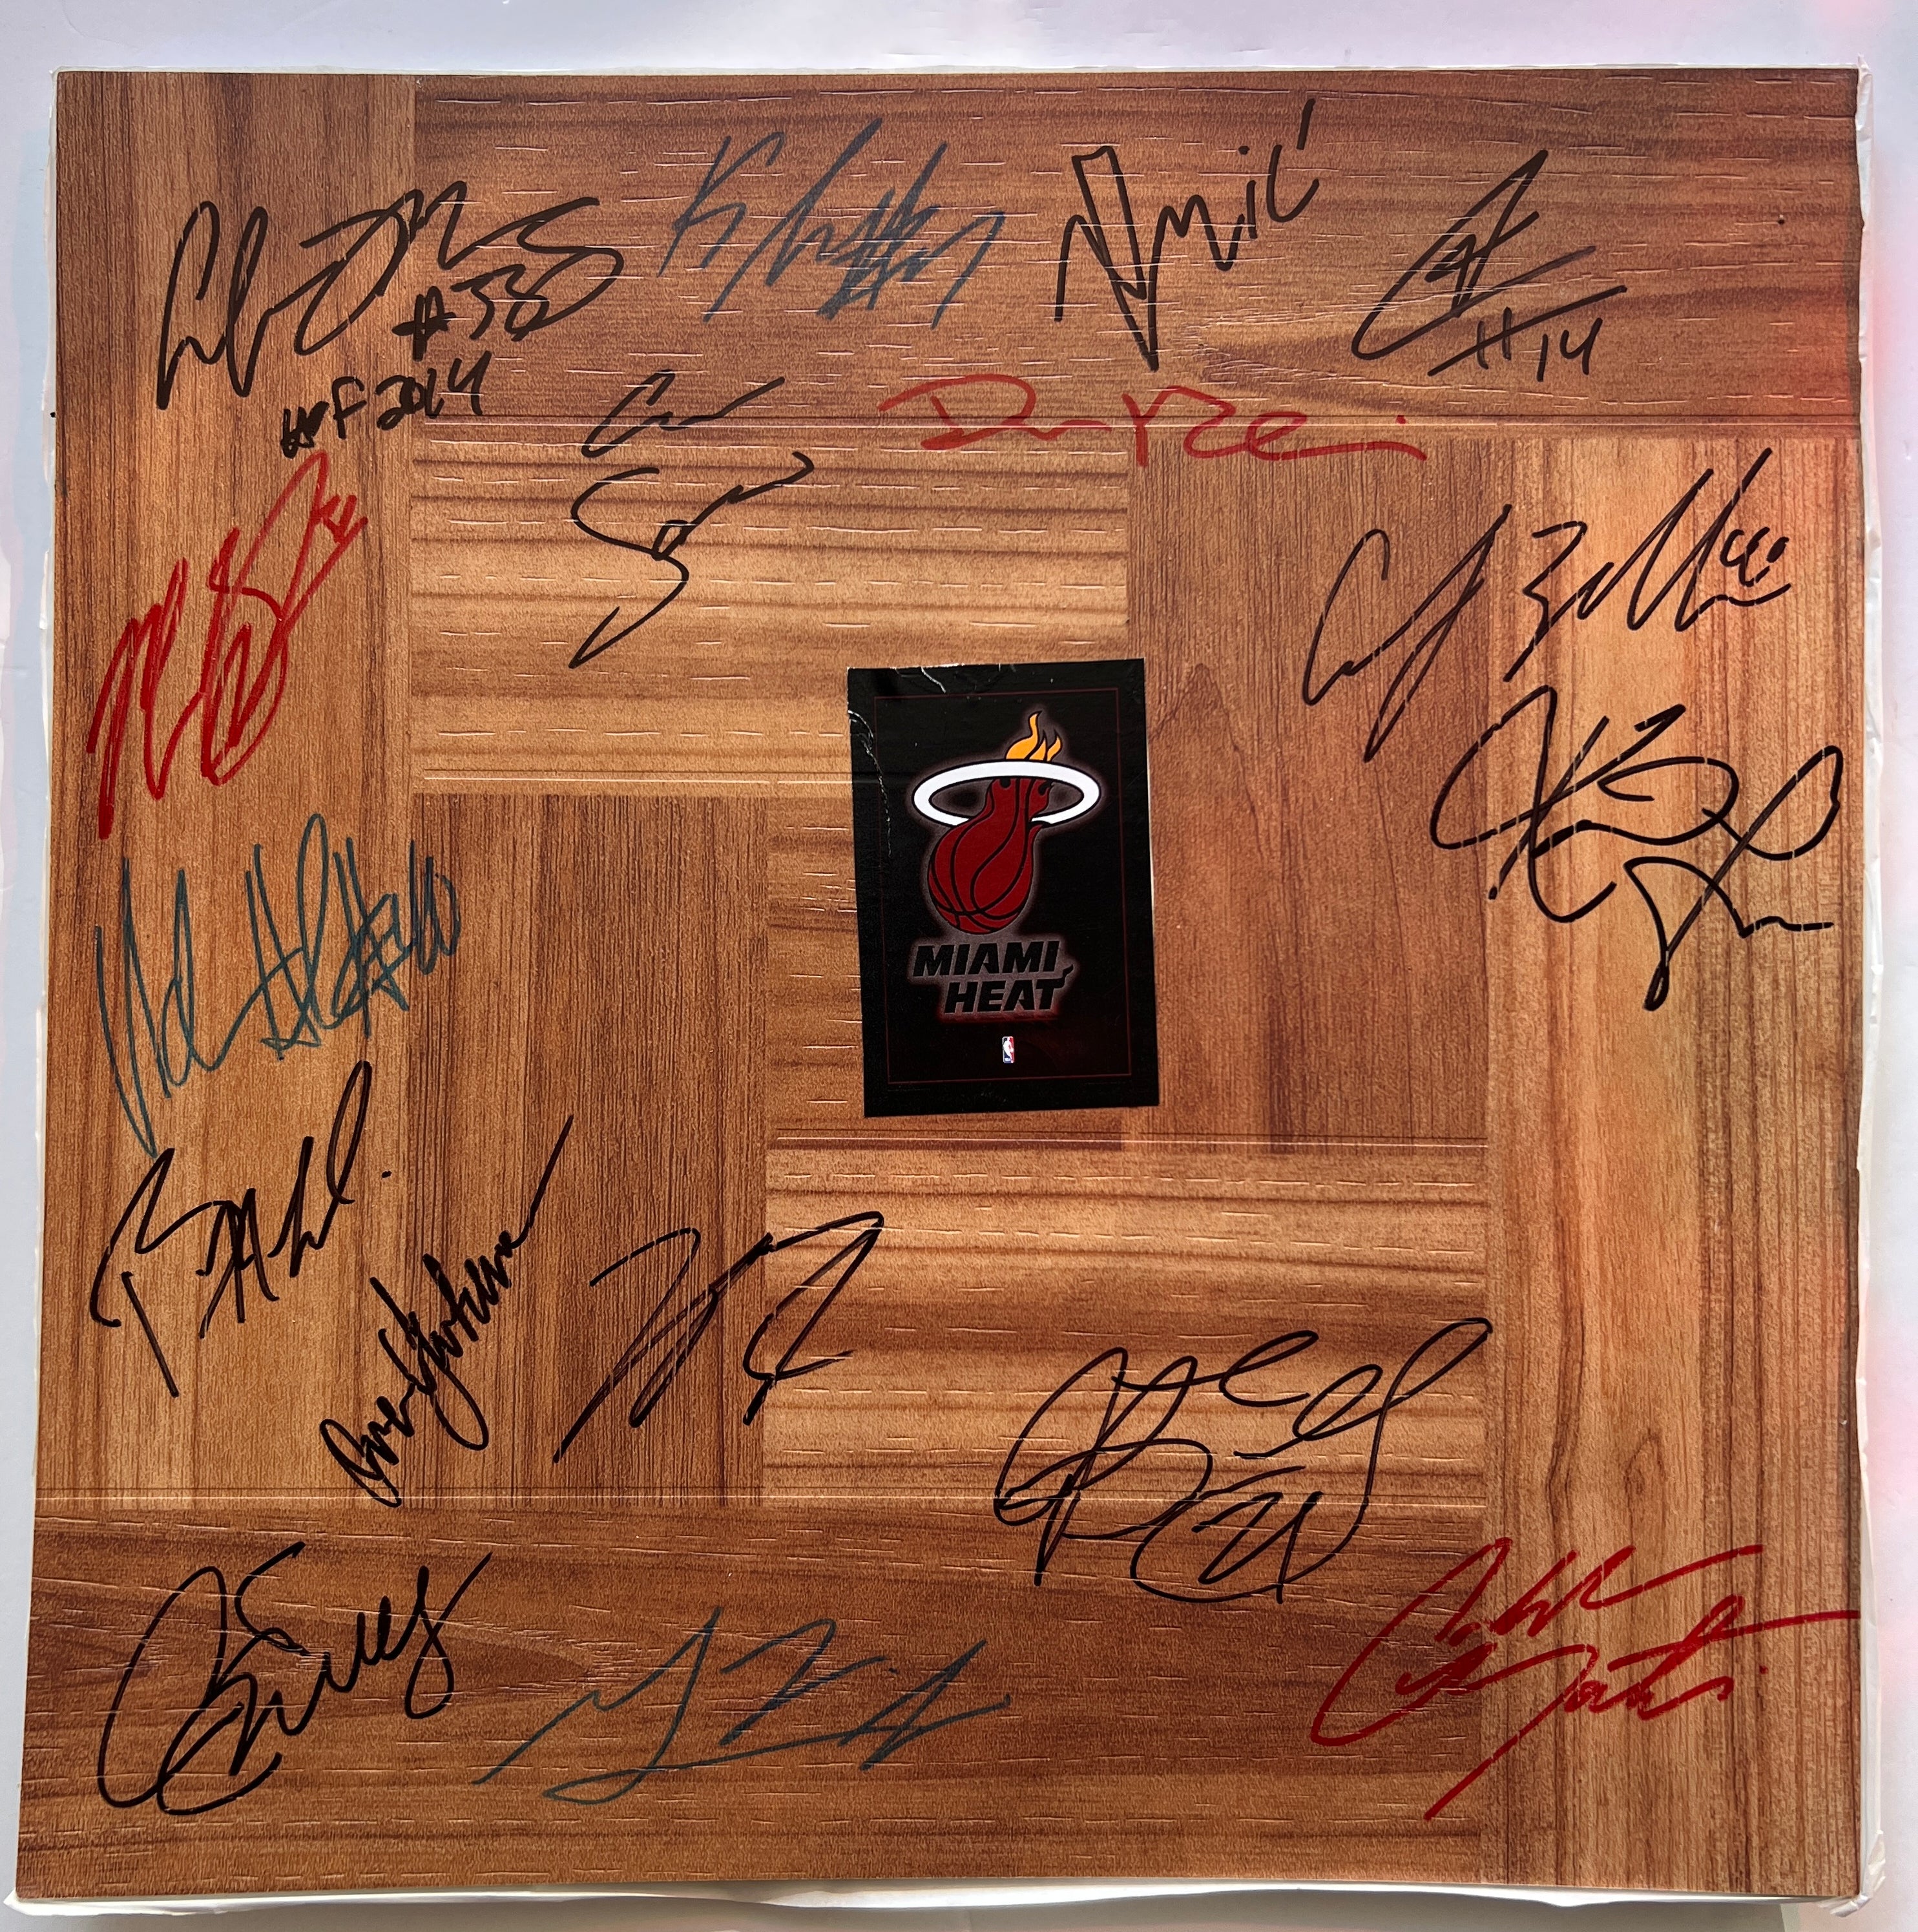 Miami Heat Jimmy Butler, Bam Adebayo 2022-23 team signed parque floor board signed with proof